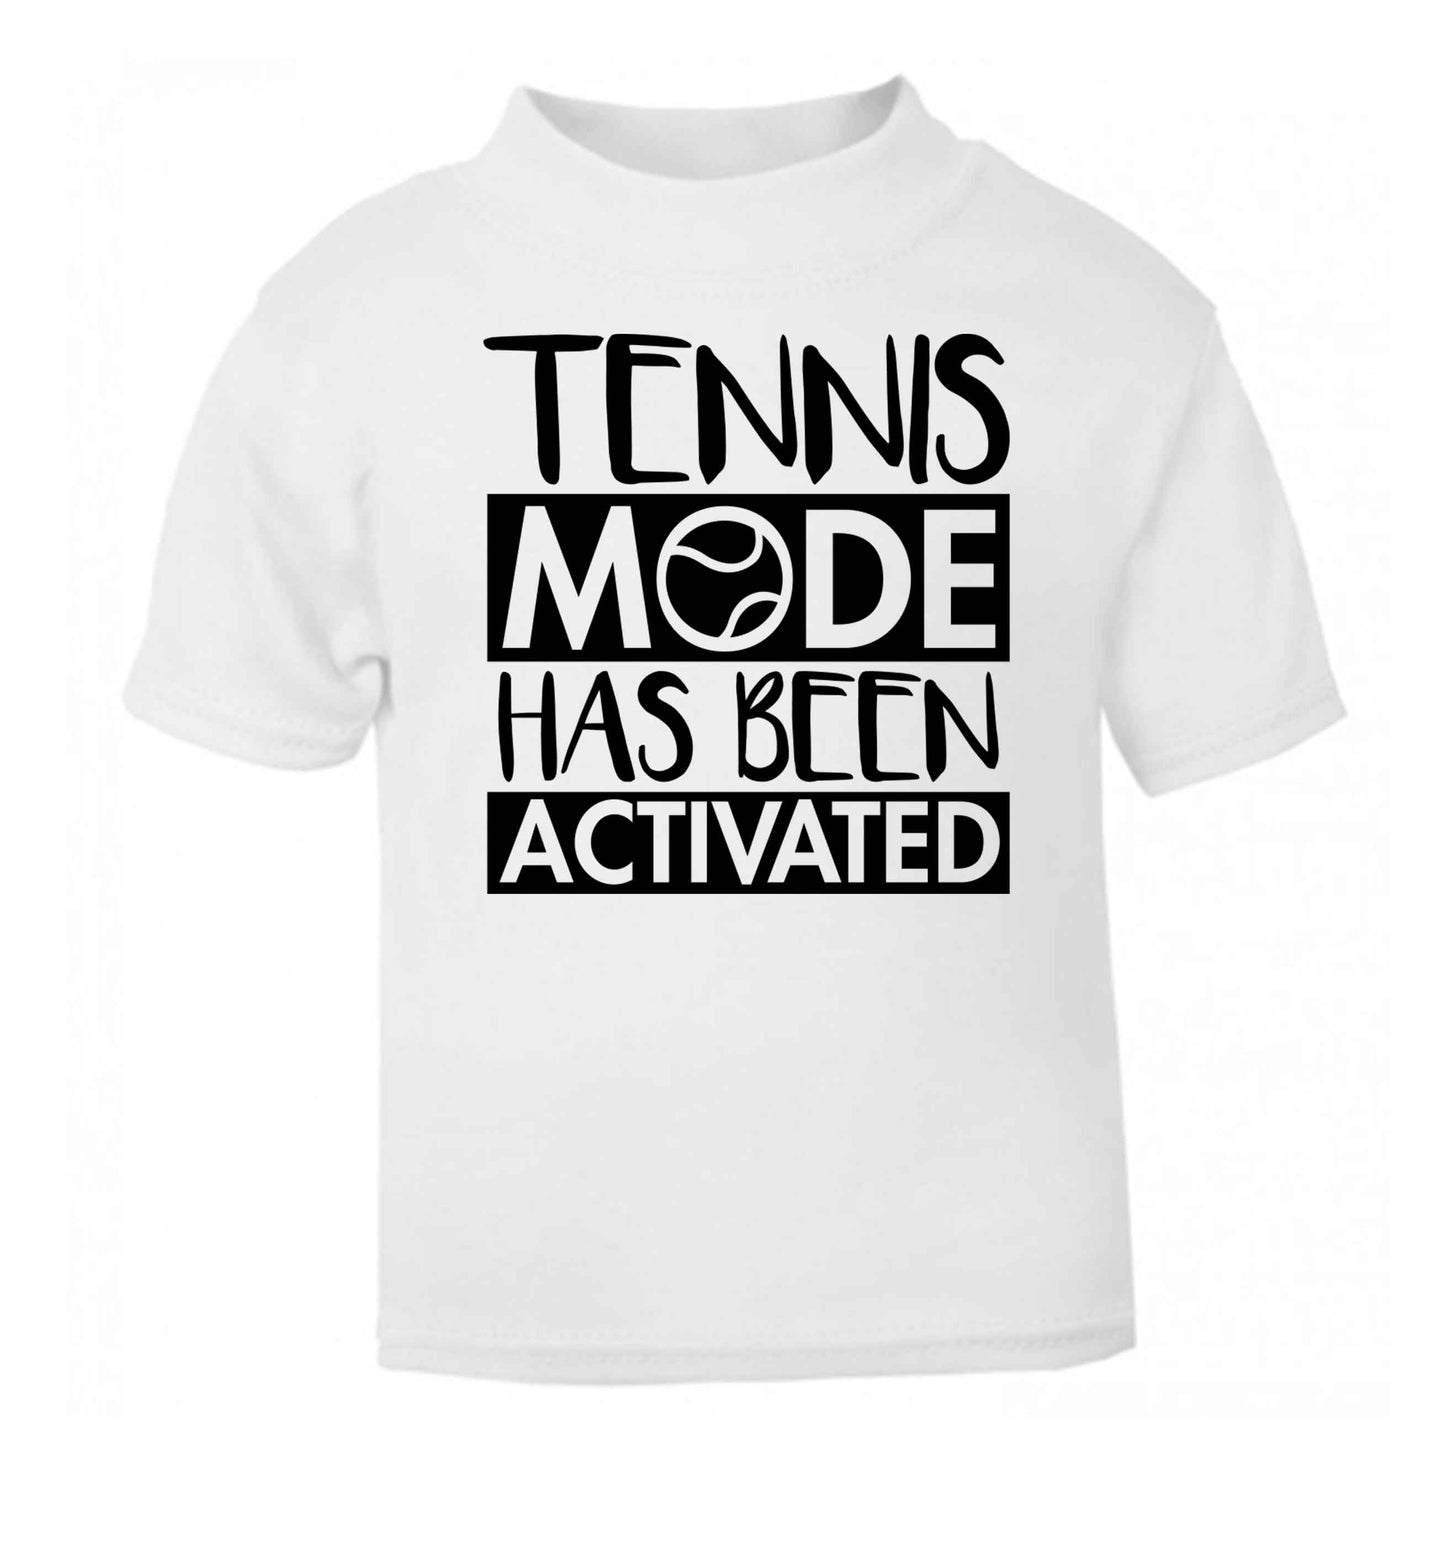 Tennis mode has been activated white Baby Toddler Tshirt 2 Years